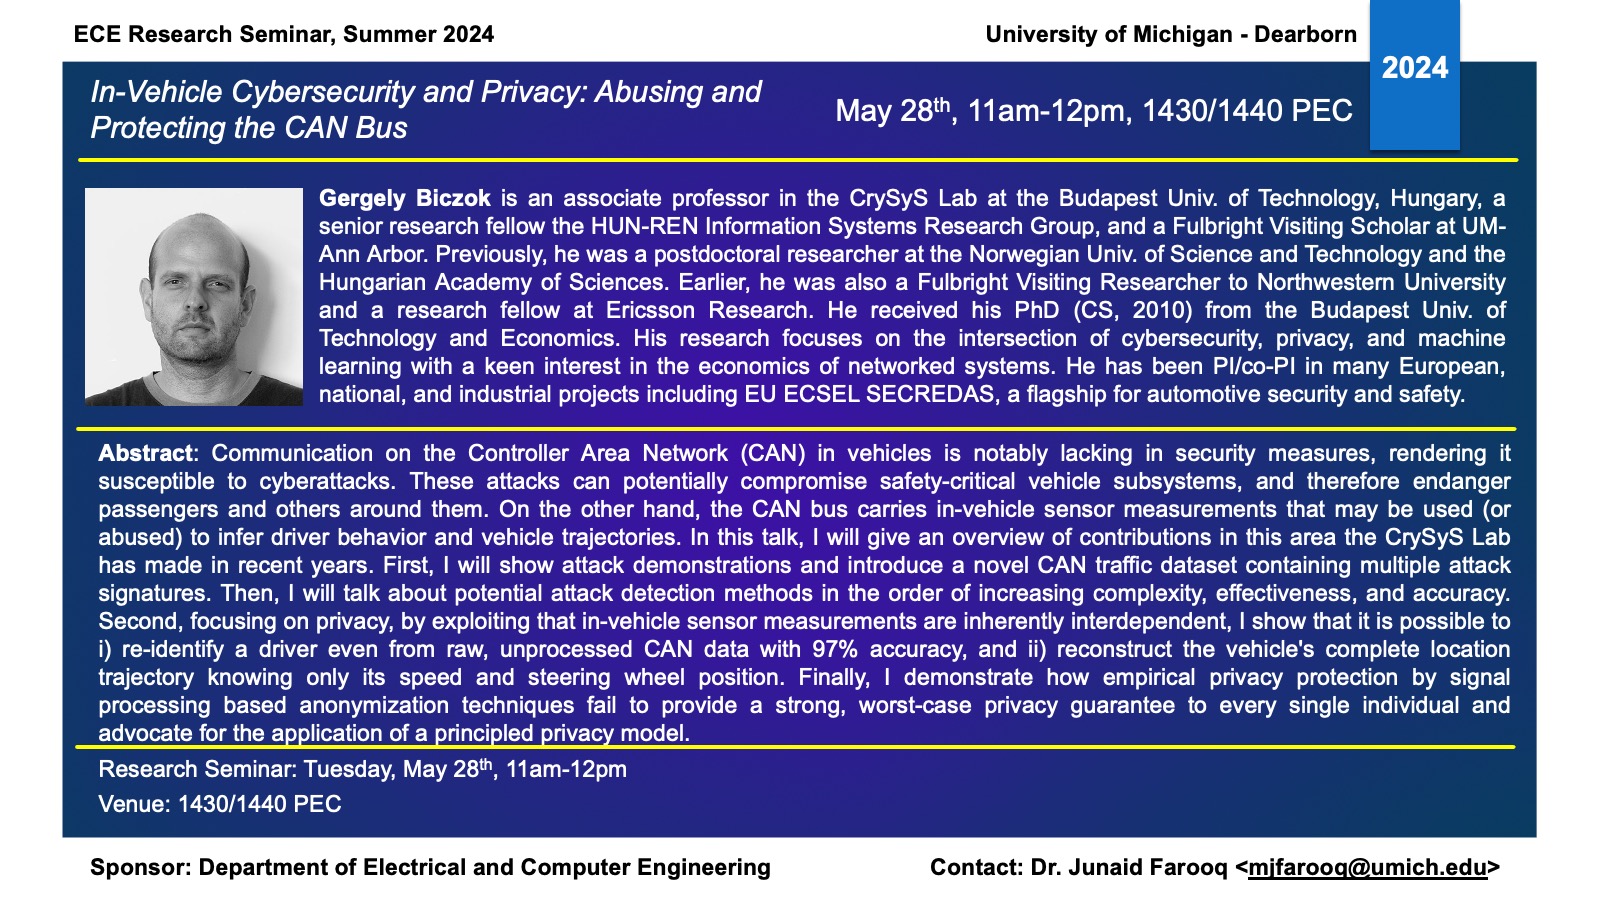 ECE Research Seminar Flyer for Gergely Biczok